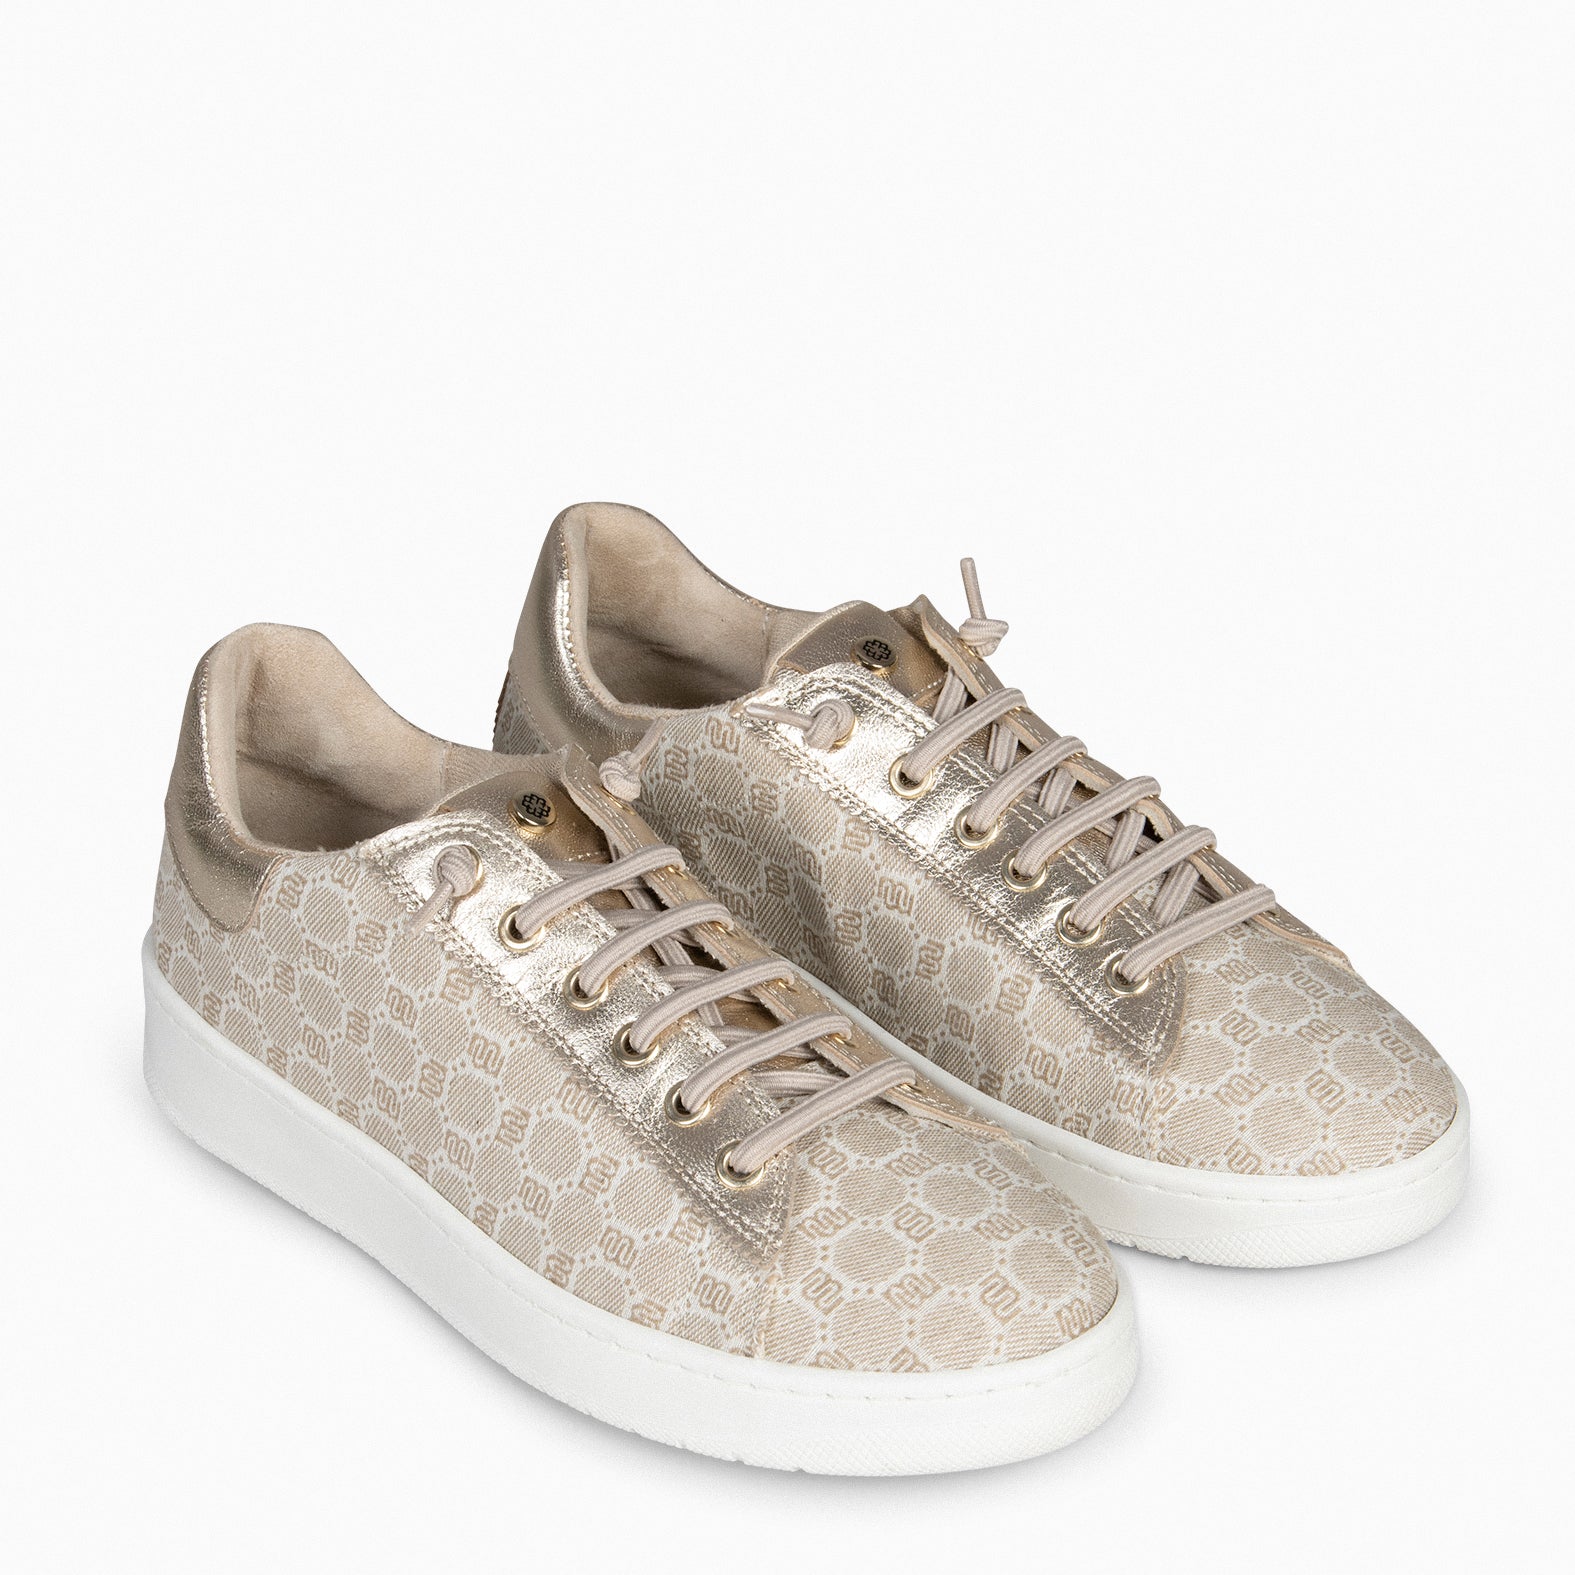 TOULOUSE - BEIGE SNEAKERS WITH ELASTIC LACES